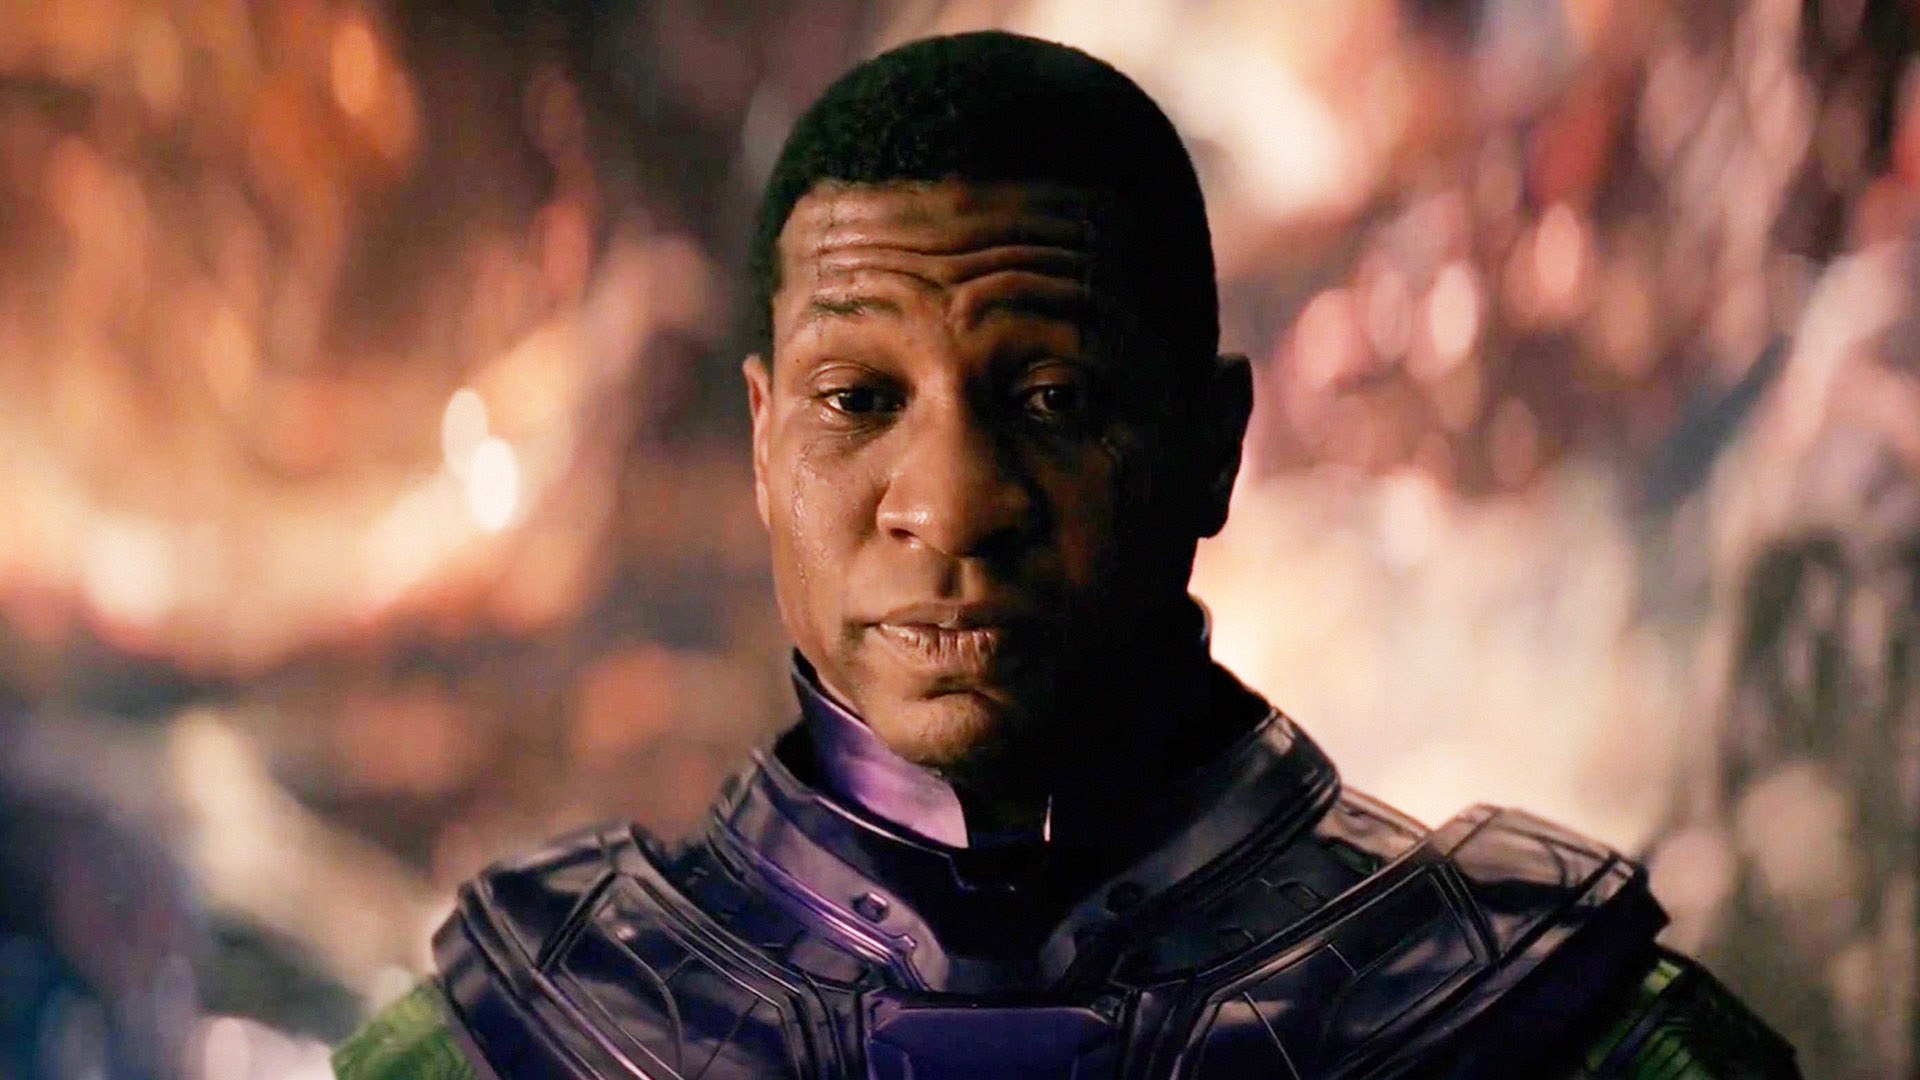 What's Next For the MCU Now That Jonathan Majors Is Convicted?